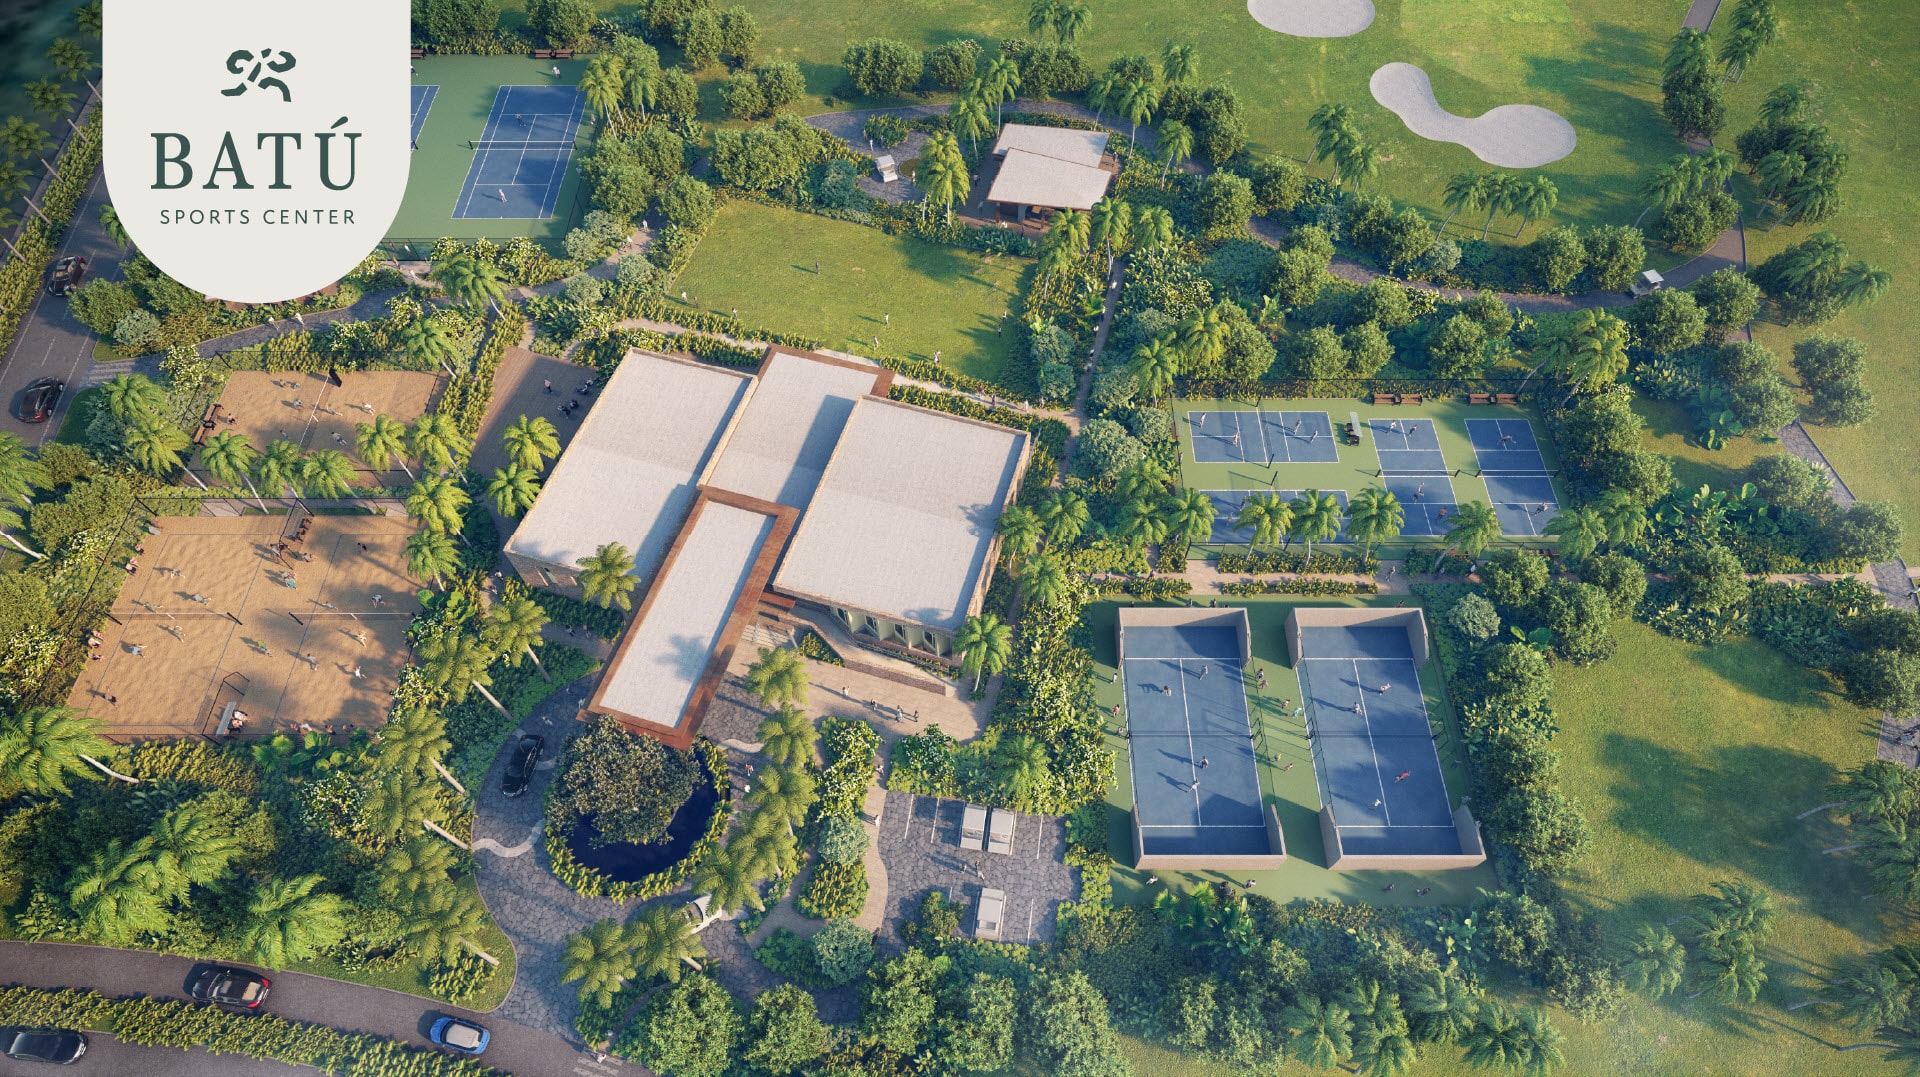 An aerial view of the exquisite BATÚ Sports Center at Grand Reserve, showcasing top-tier tennis courts amid a tropical paradise